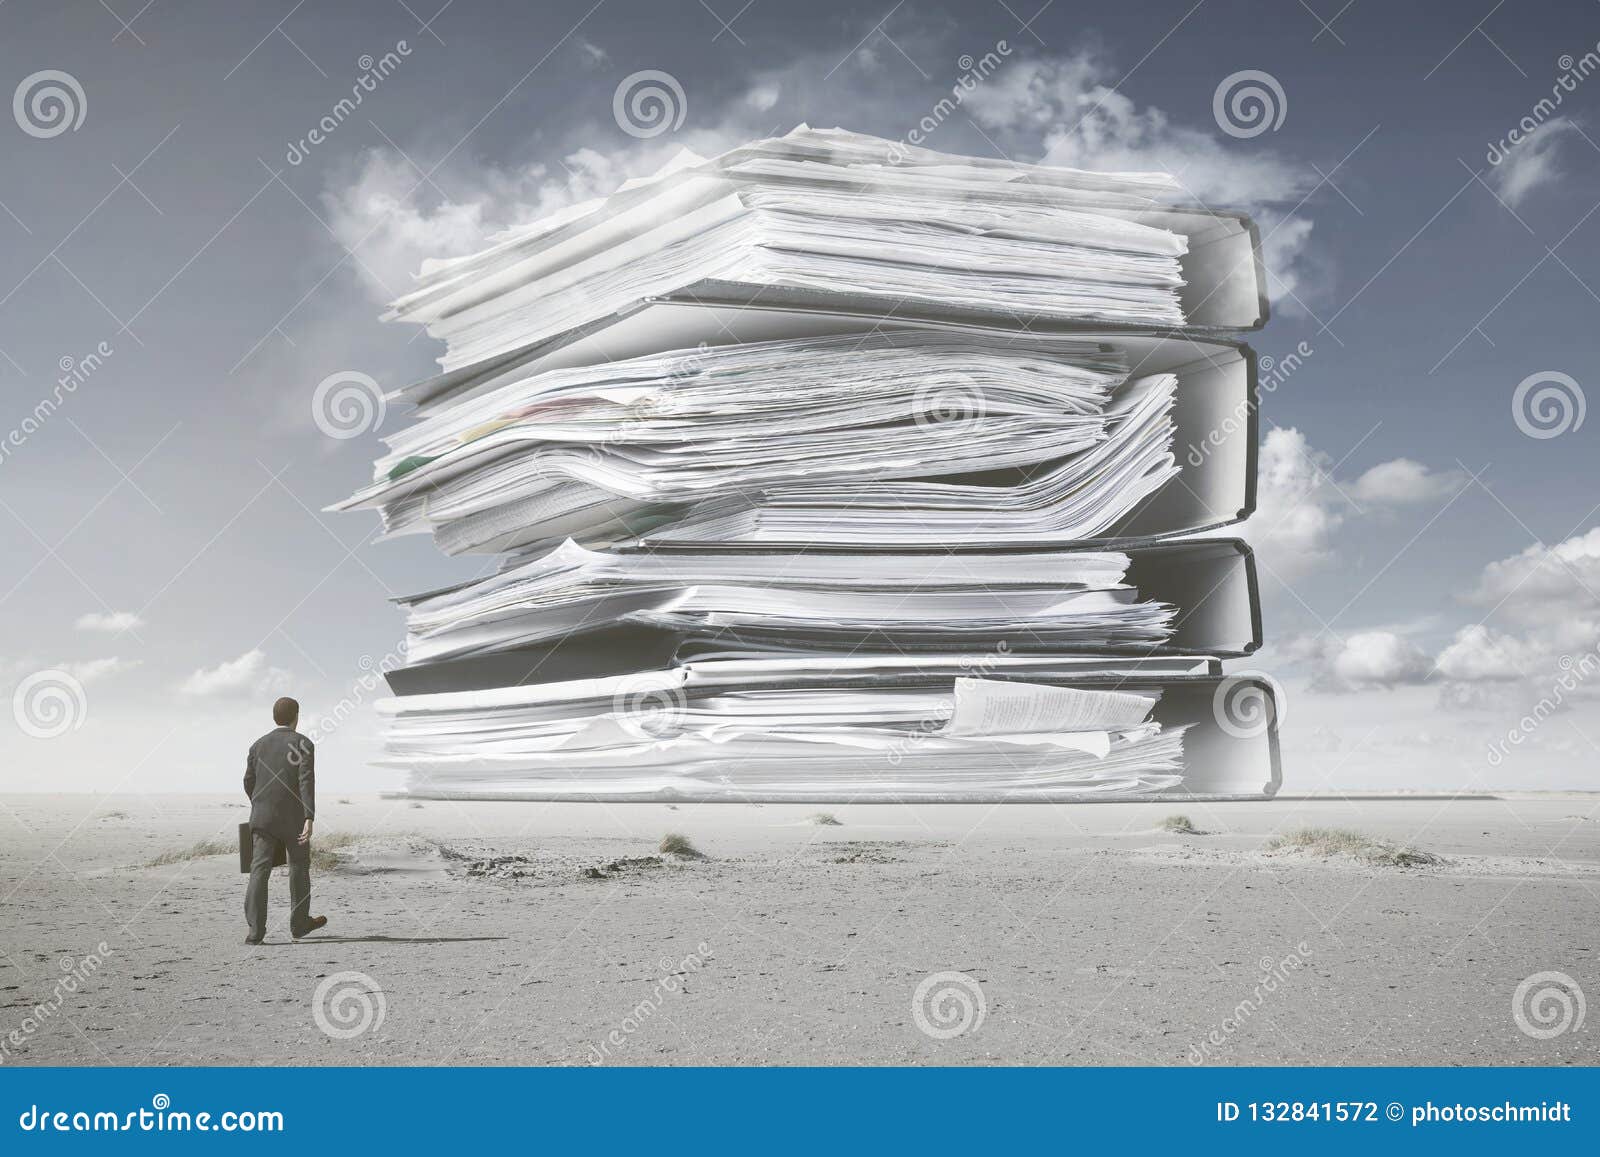 a mountain of paperwork